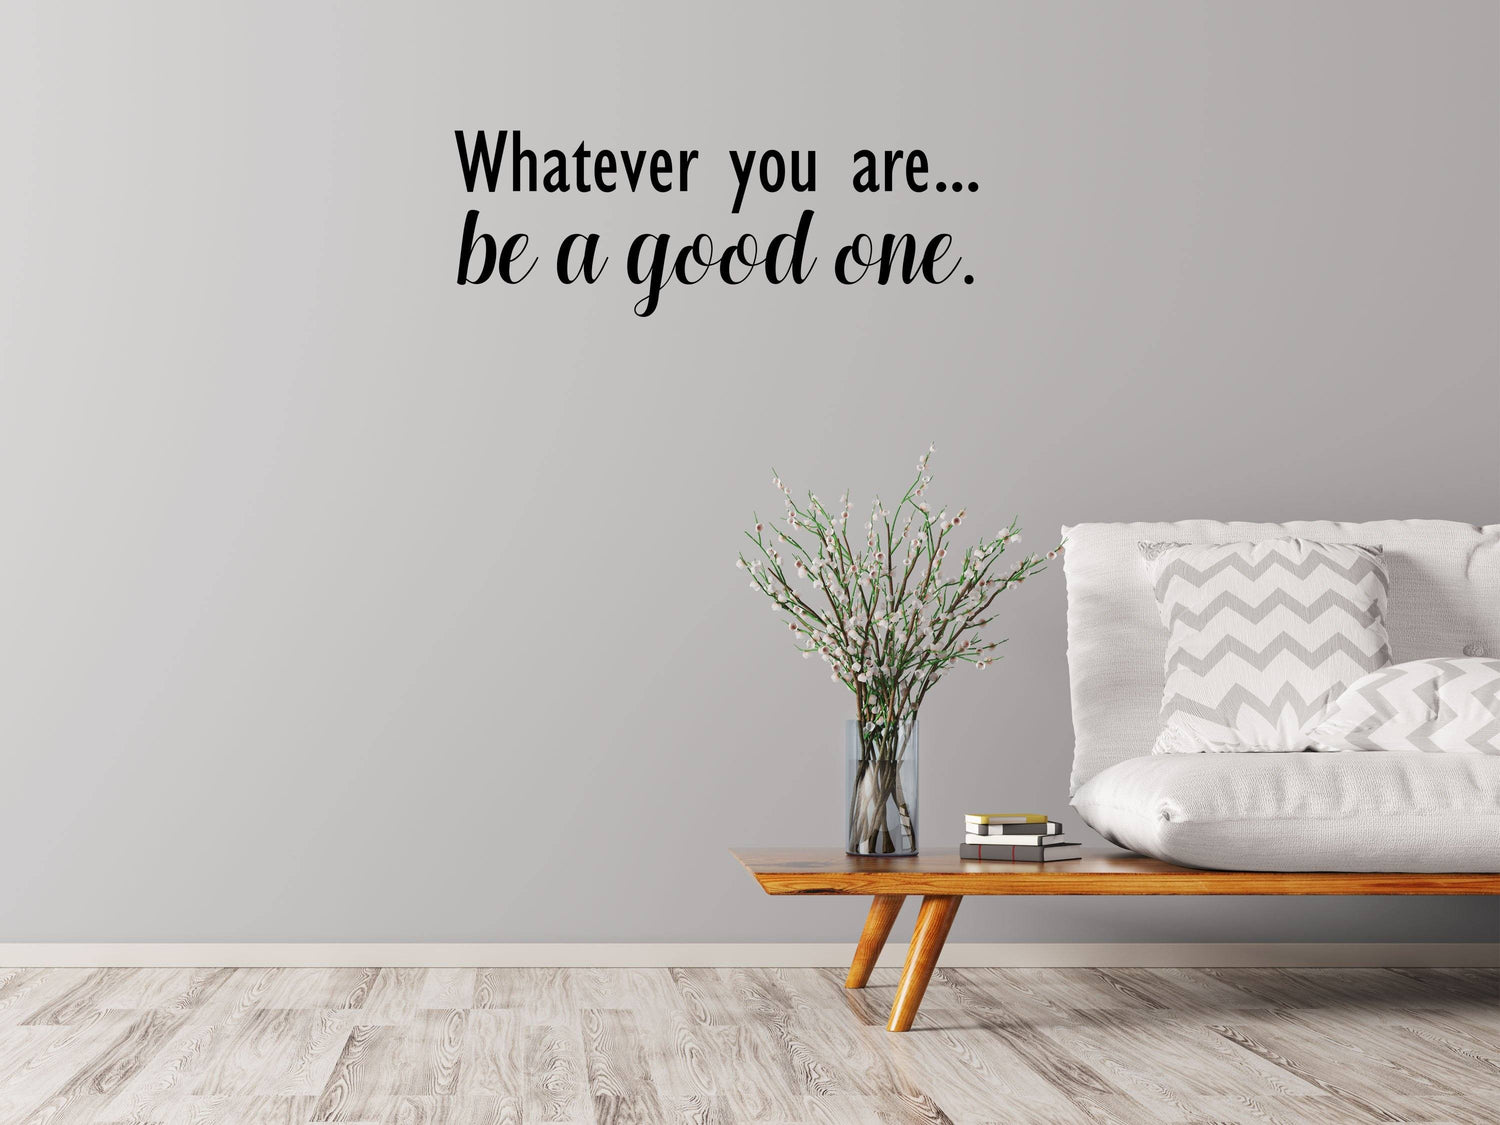 Whatever you are.. Be a Good One - Inspirational Wall Decals Home Decor Decals Inspirational Wall Signs 